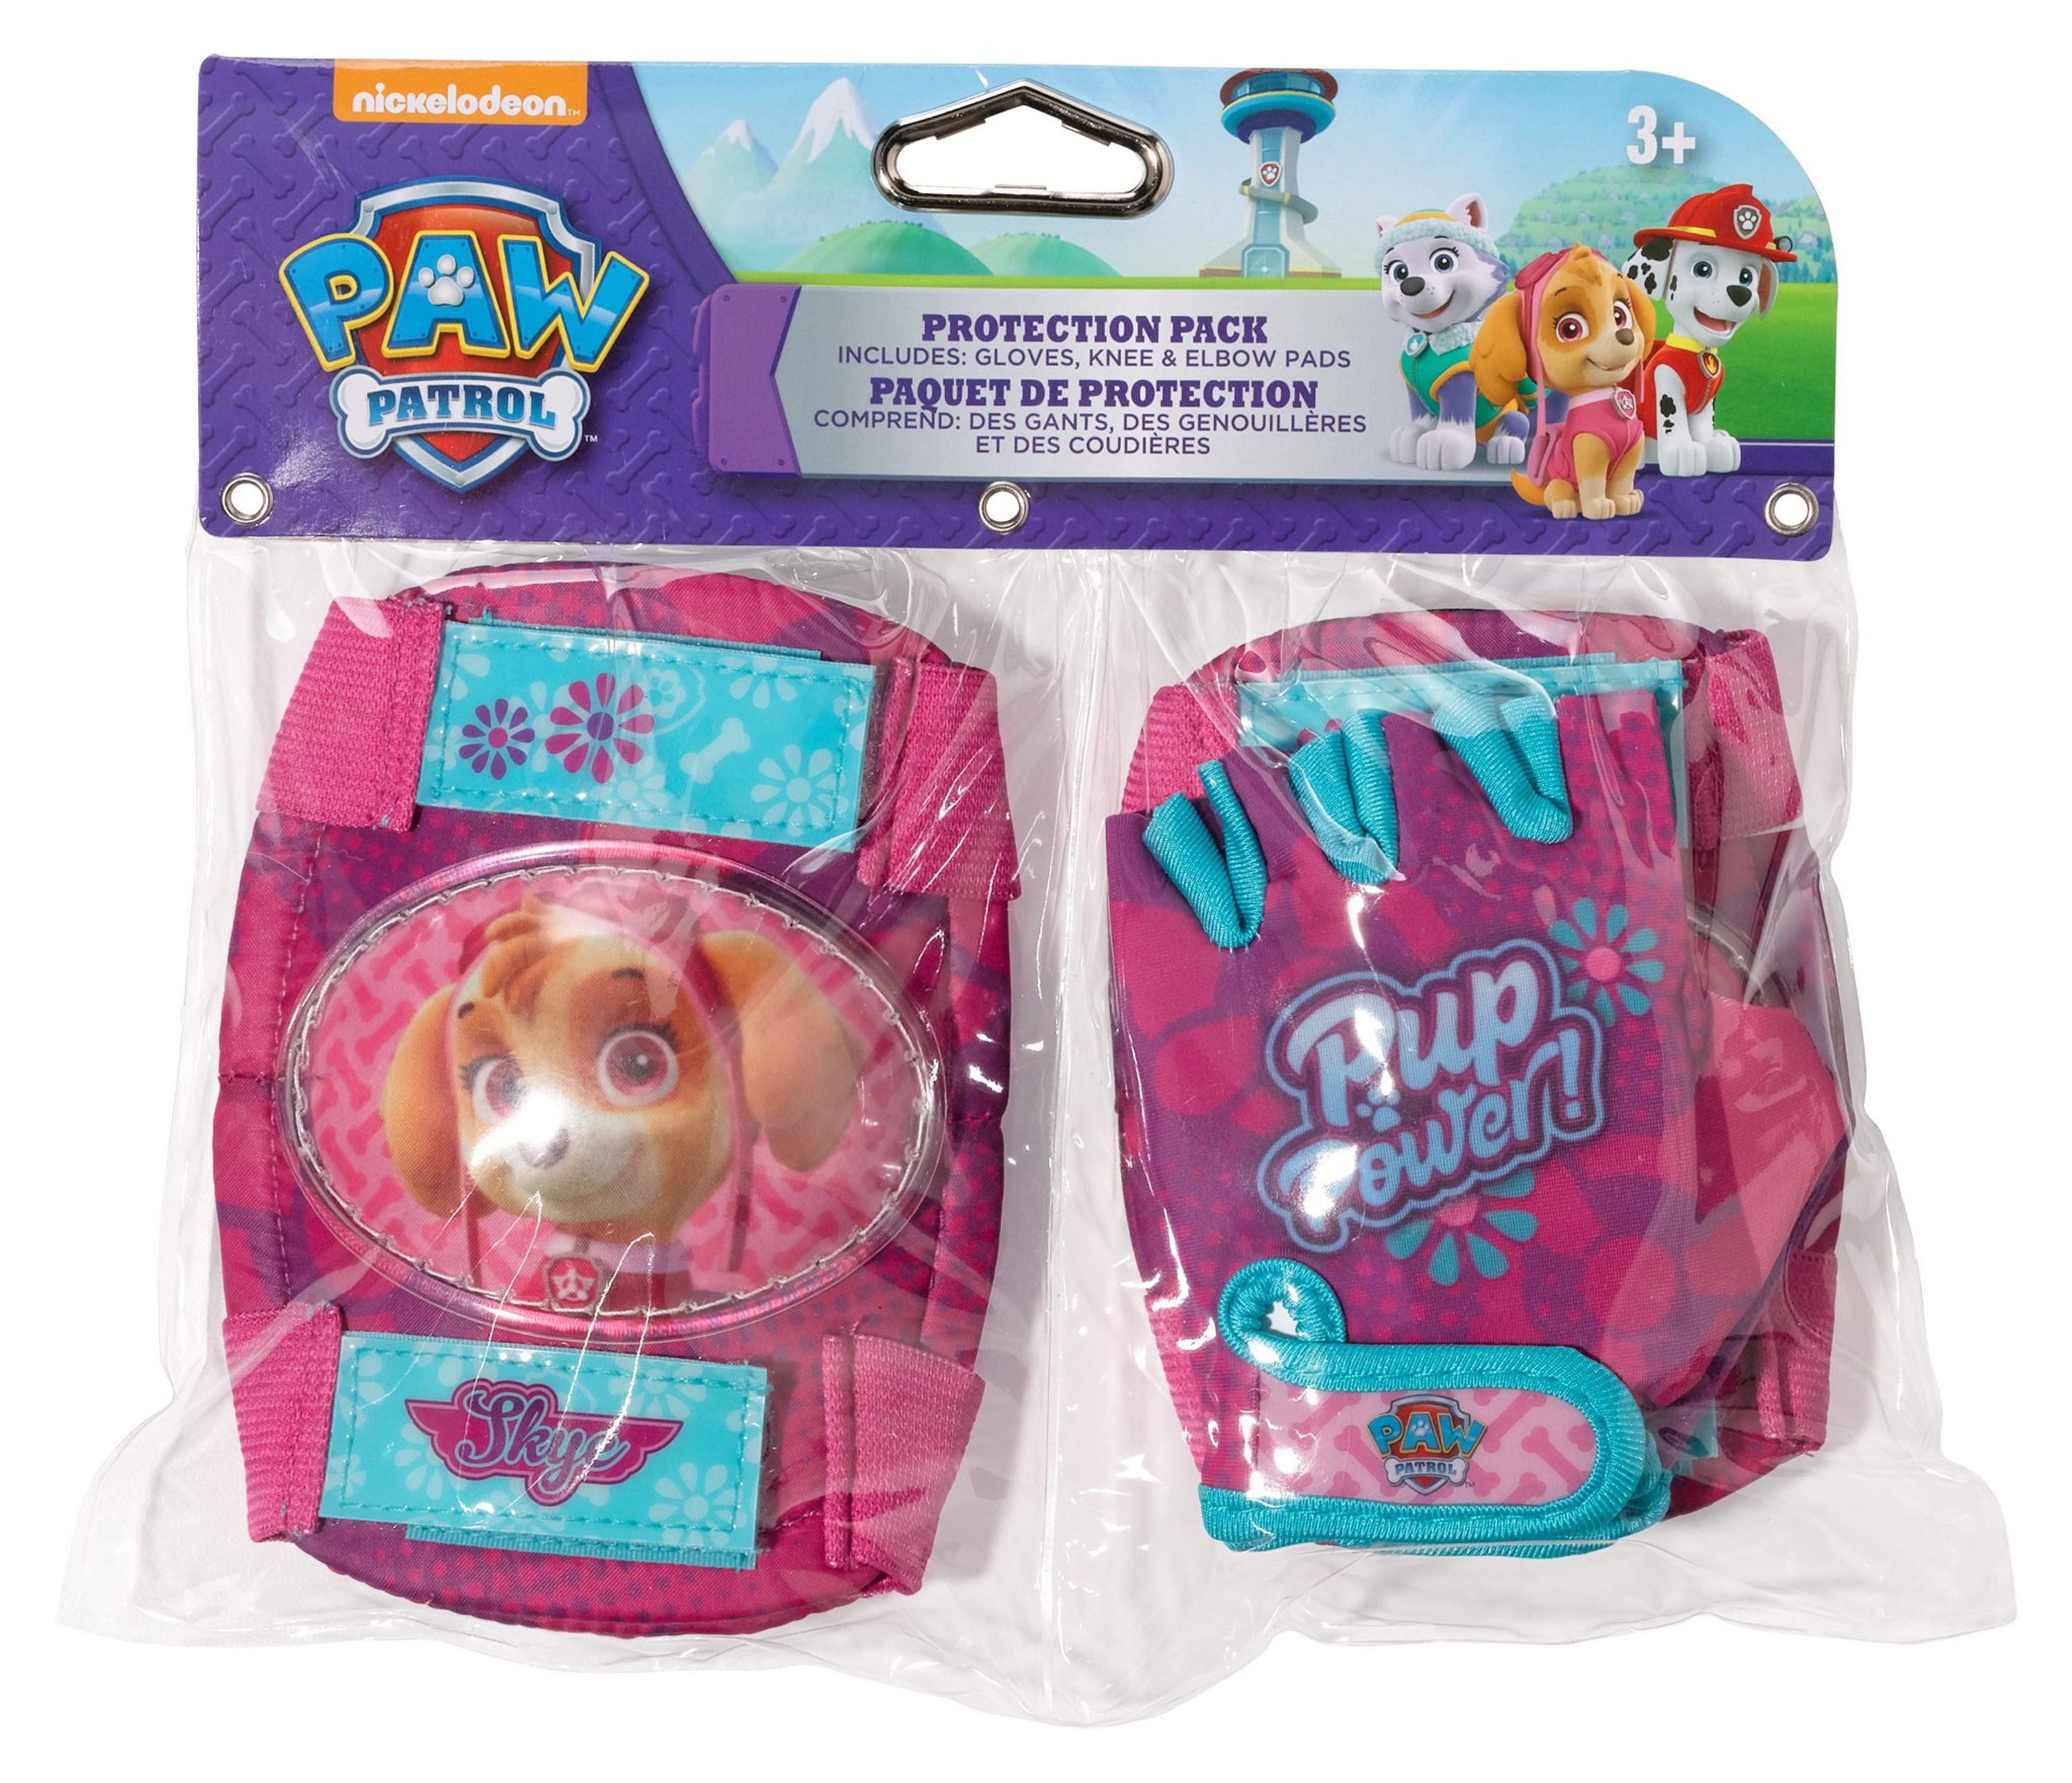 Rubble Nickelodeon Paw Patrol Knee and Elbow Pads with Gloves for Kids and Children and Chase Rocky Featuring Skye Adjustable Straps for a Custom Fit Marshall 